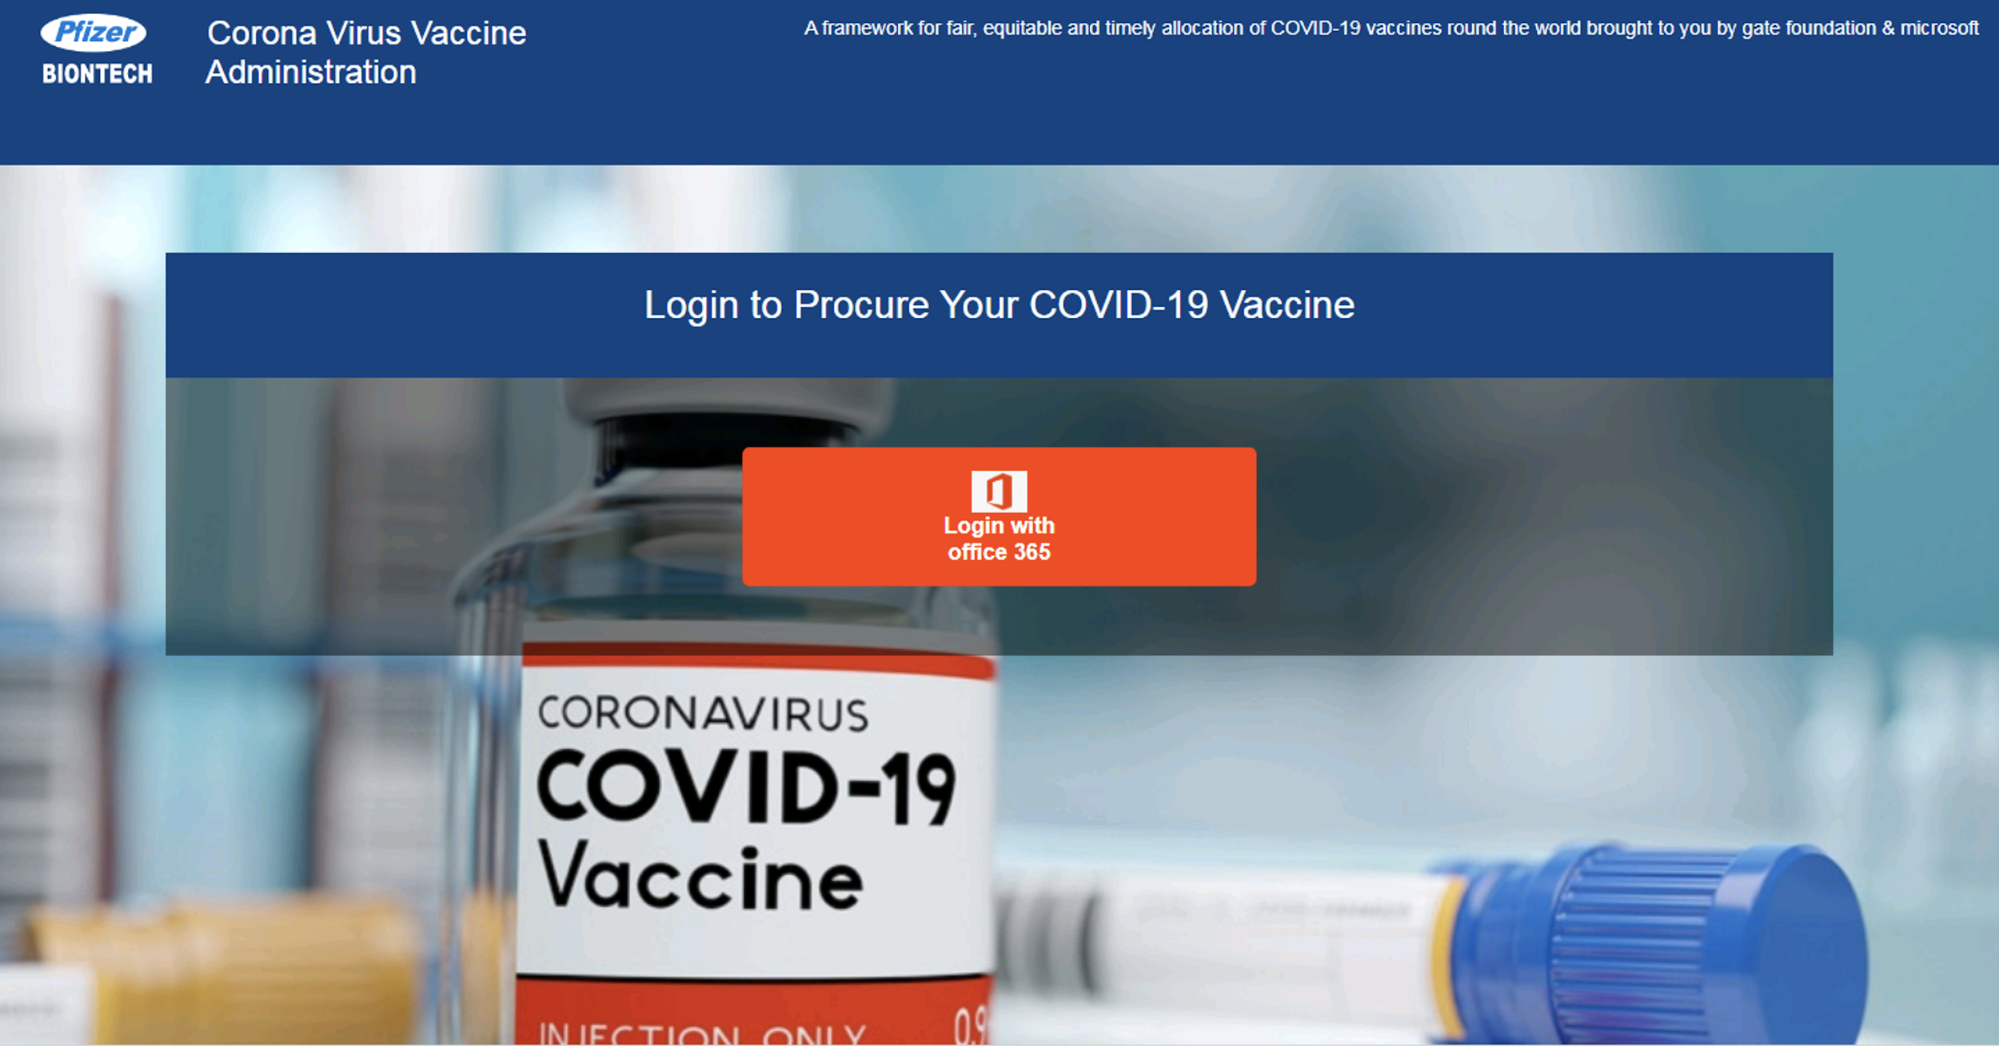 This is an example of a fake website that claims to represent Pfizer and BioNTech, the makers of the mRNA vaccine. The phishing page asks the user to log in with his or her Office 365 credentials, supposedly in order to sign up for the vaccine.